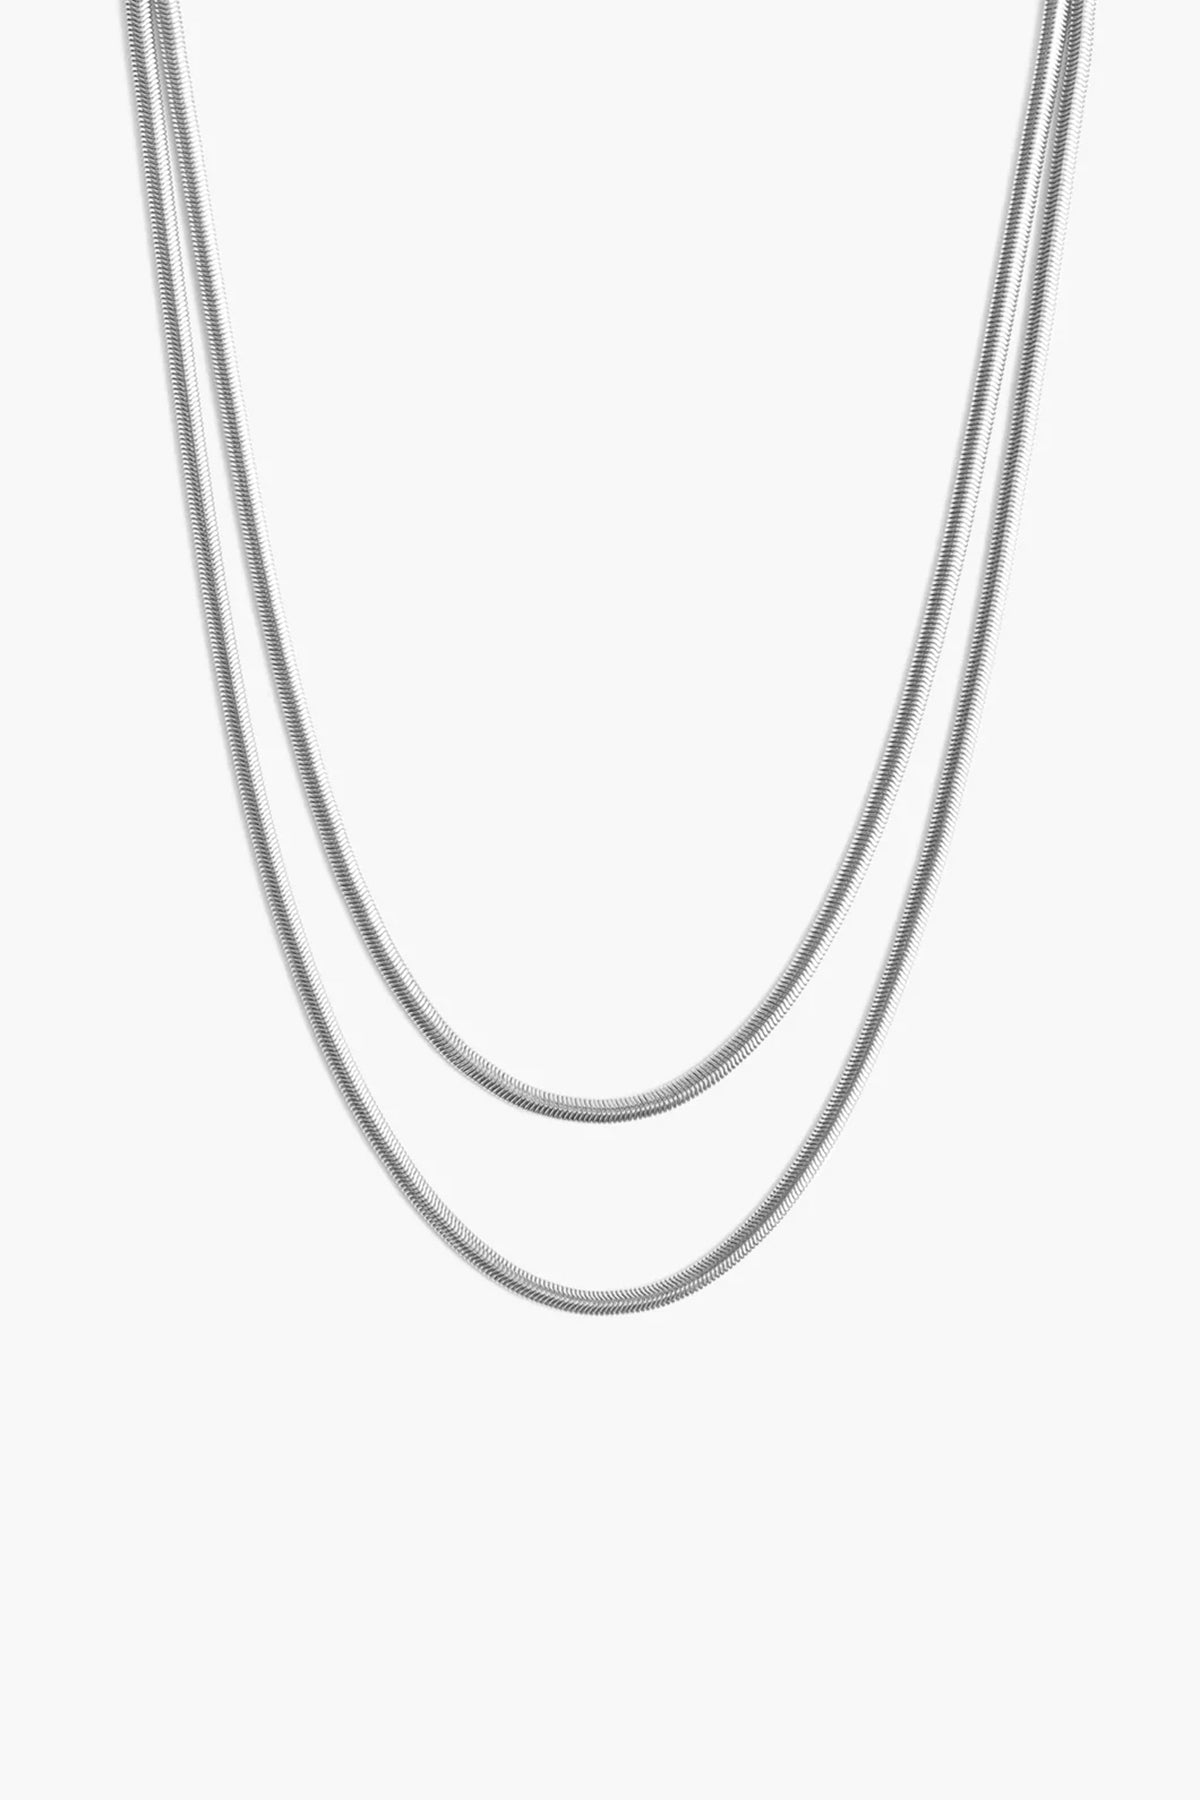 Marrin Costello - Ramsey Layered Necklace - Silver